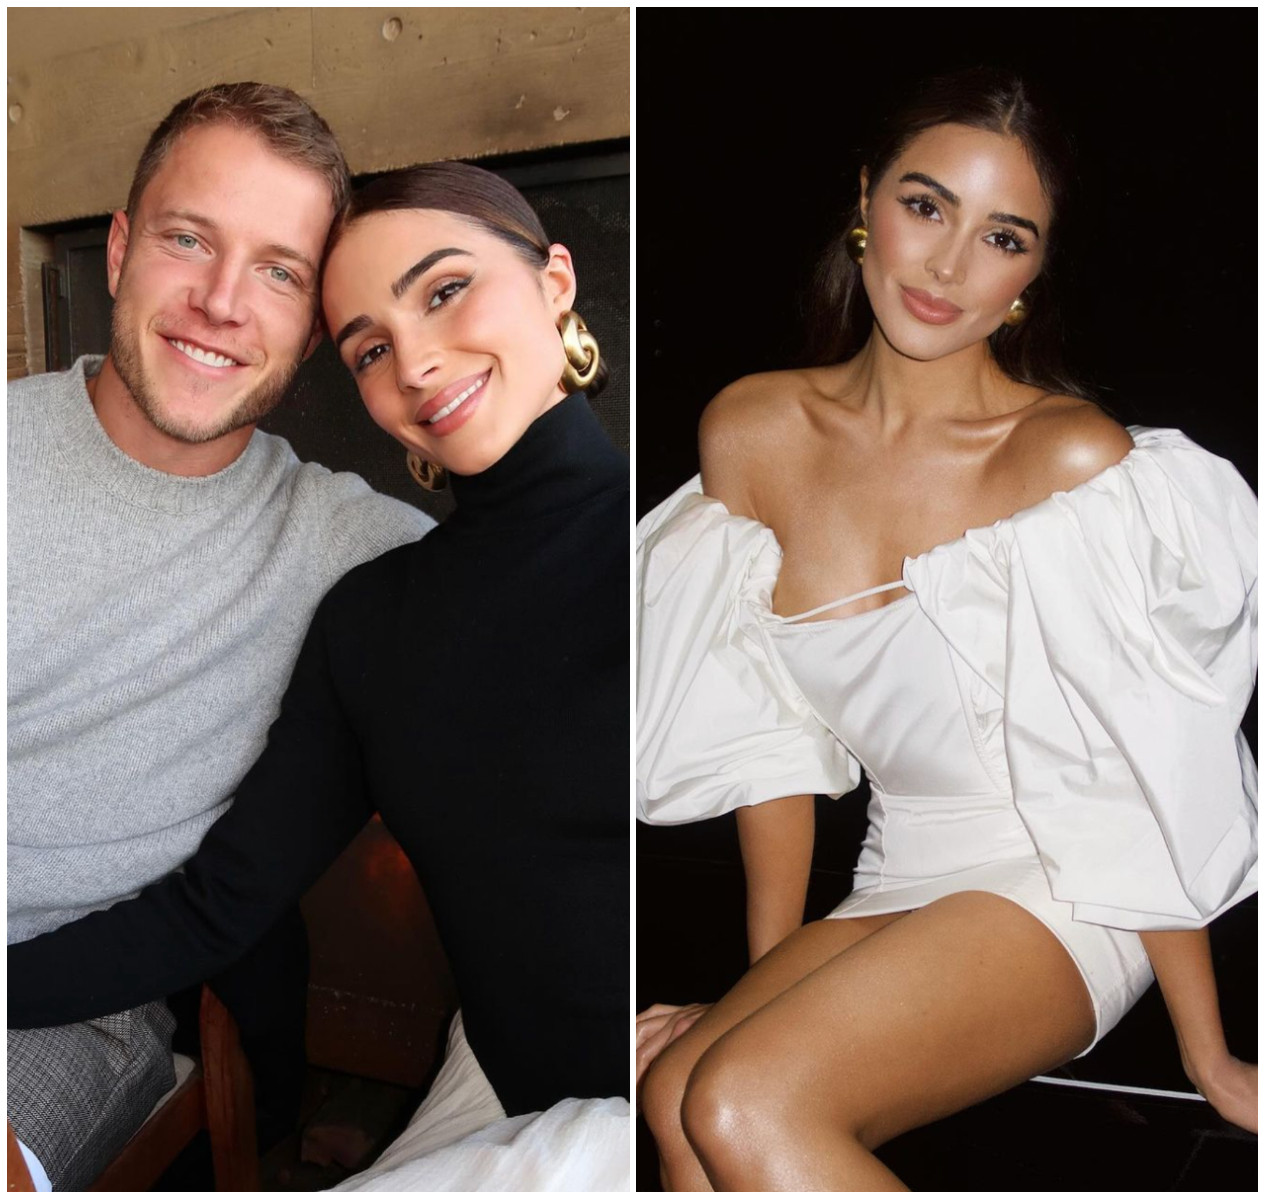 NFL star Christian McCaffrey is engaged to actress and model Olivia Culpo. Photos: @oliviaculpo/Instagram